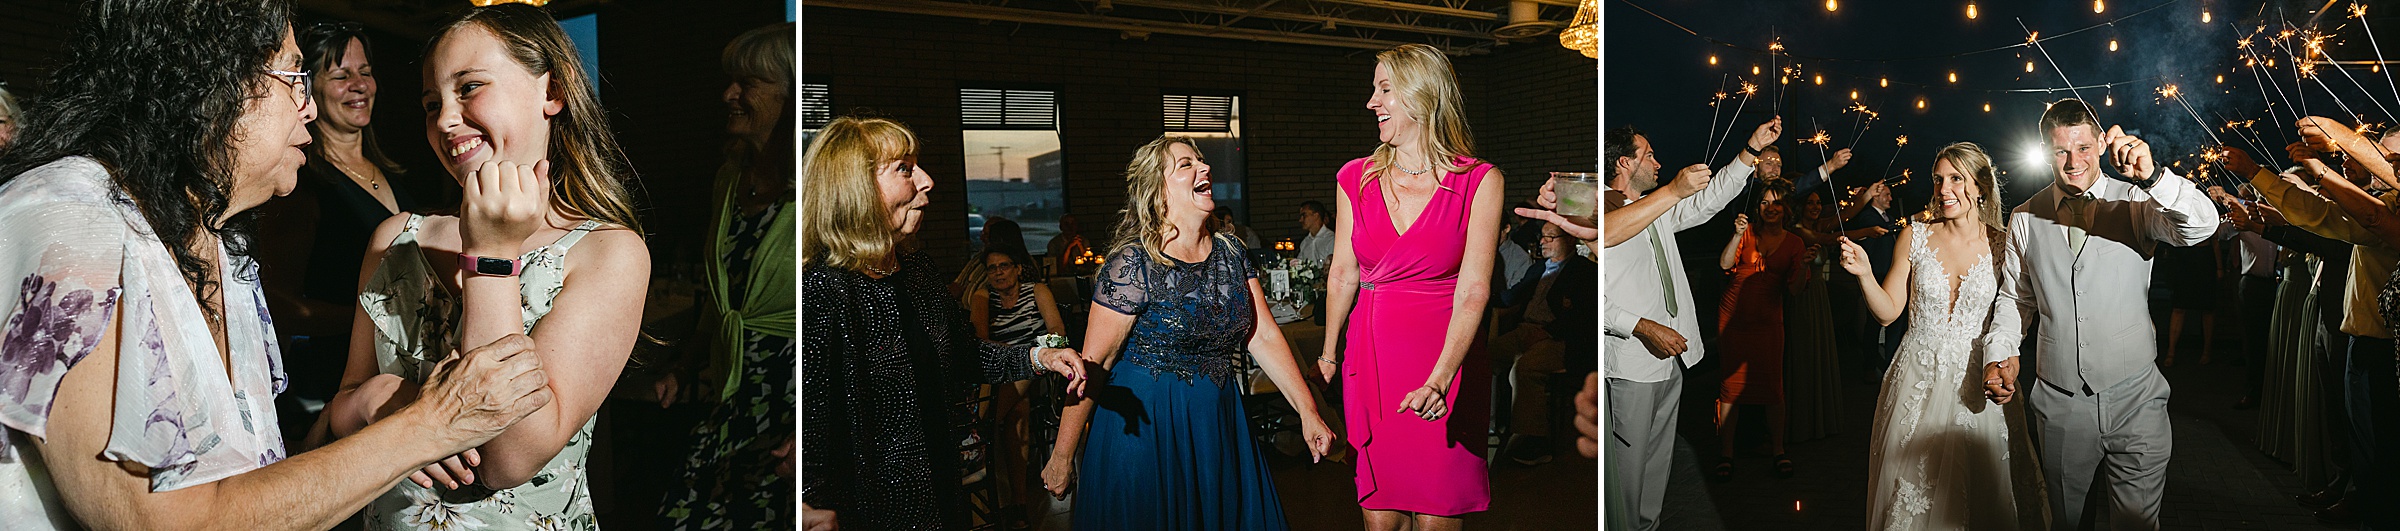 dance floor photos at Port 393 in Holland Michigan by Michele Maloney Photography